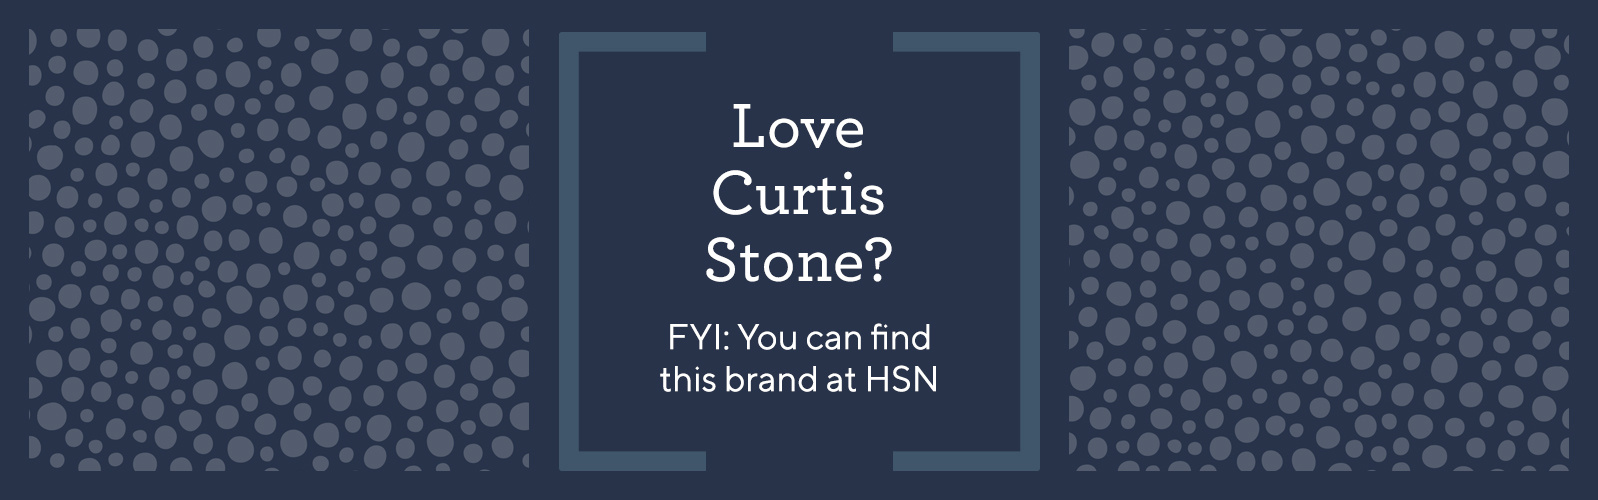 Love Curtis Stone?  FYI: You can find this brand at HSN